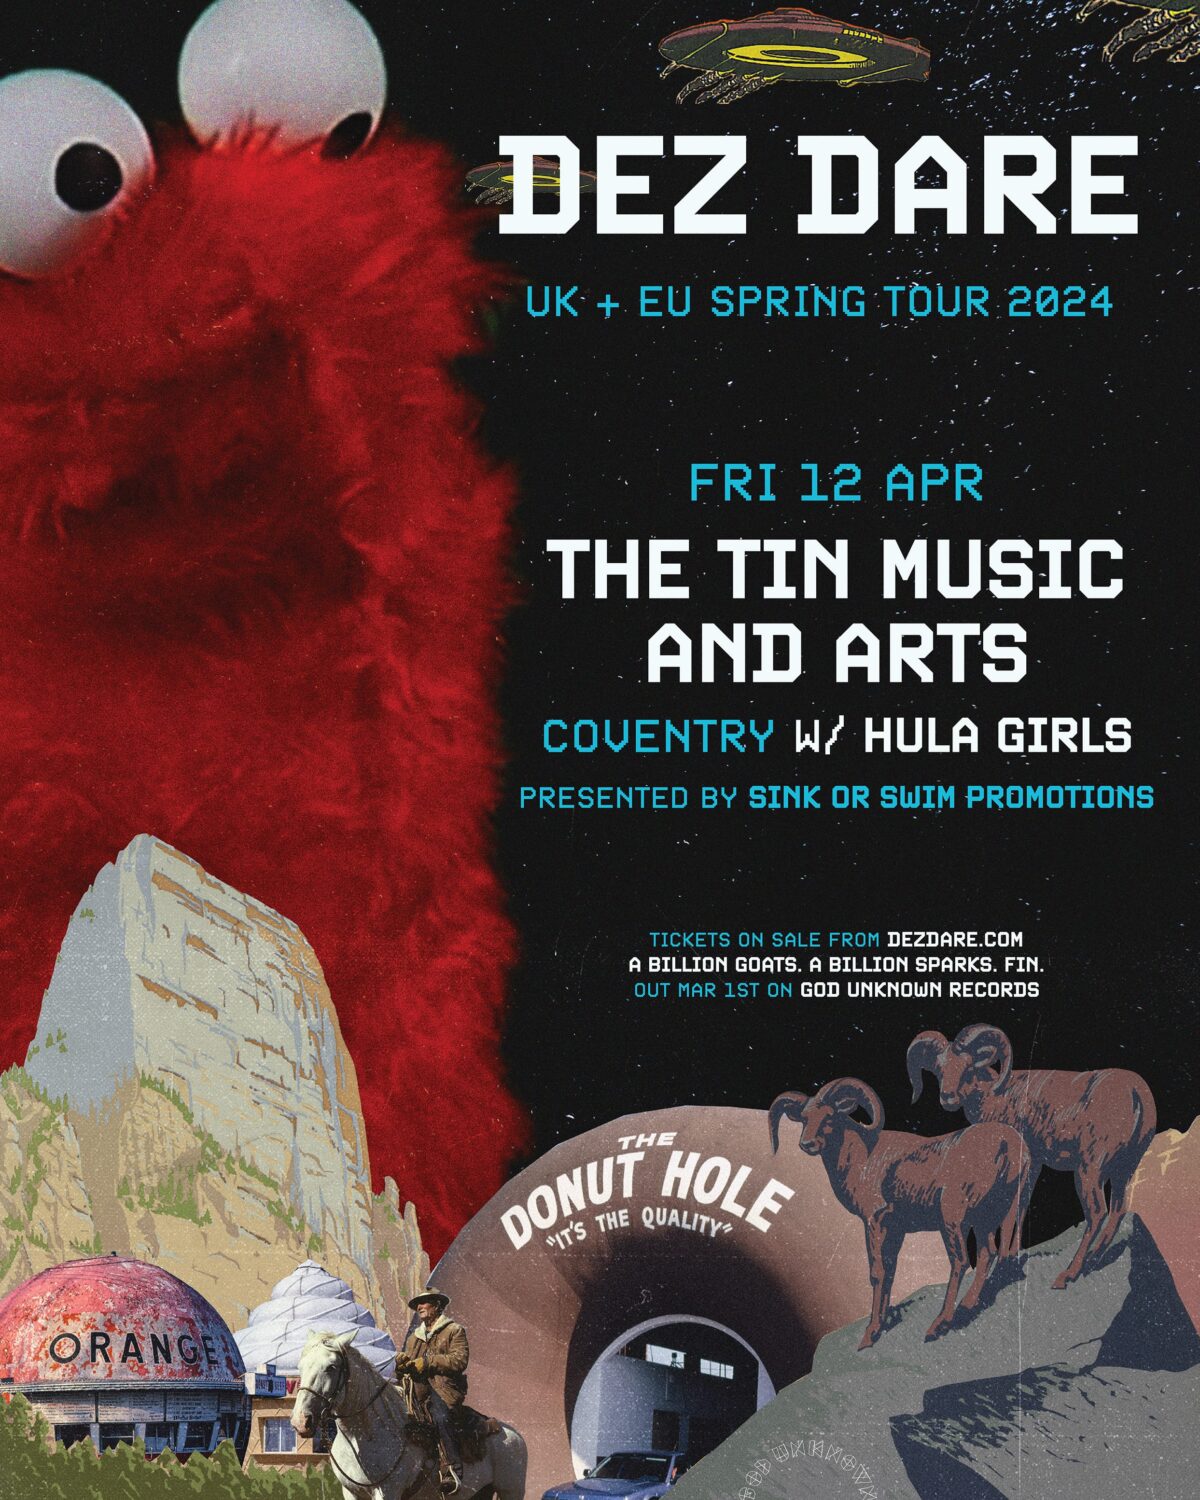 Poster for Dez Dare's performance at The Tin Music and Arts as part of a UK and EU Spring Tour on Friday 12th April 2024, presented by Sink or Swim Promotions. Tickets are £9 in advance.